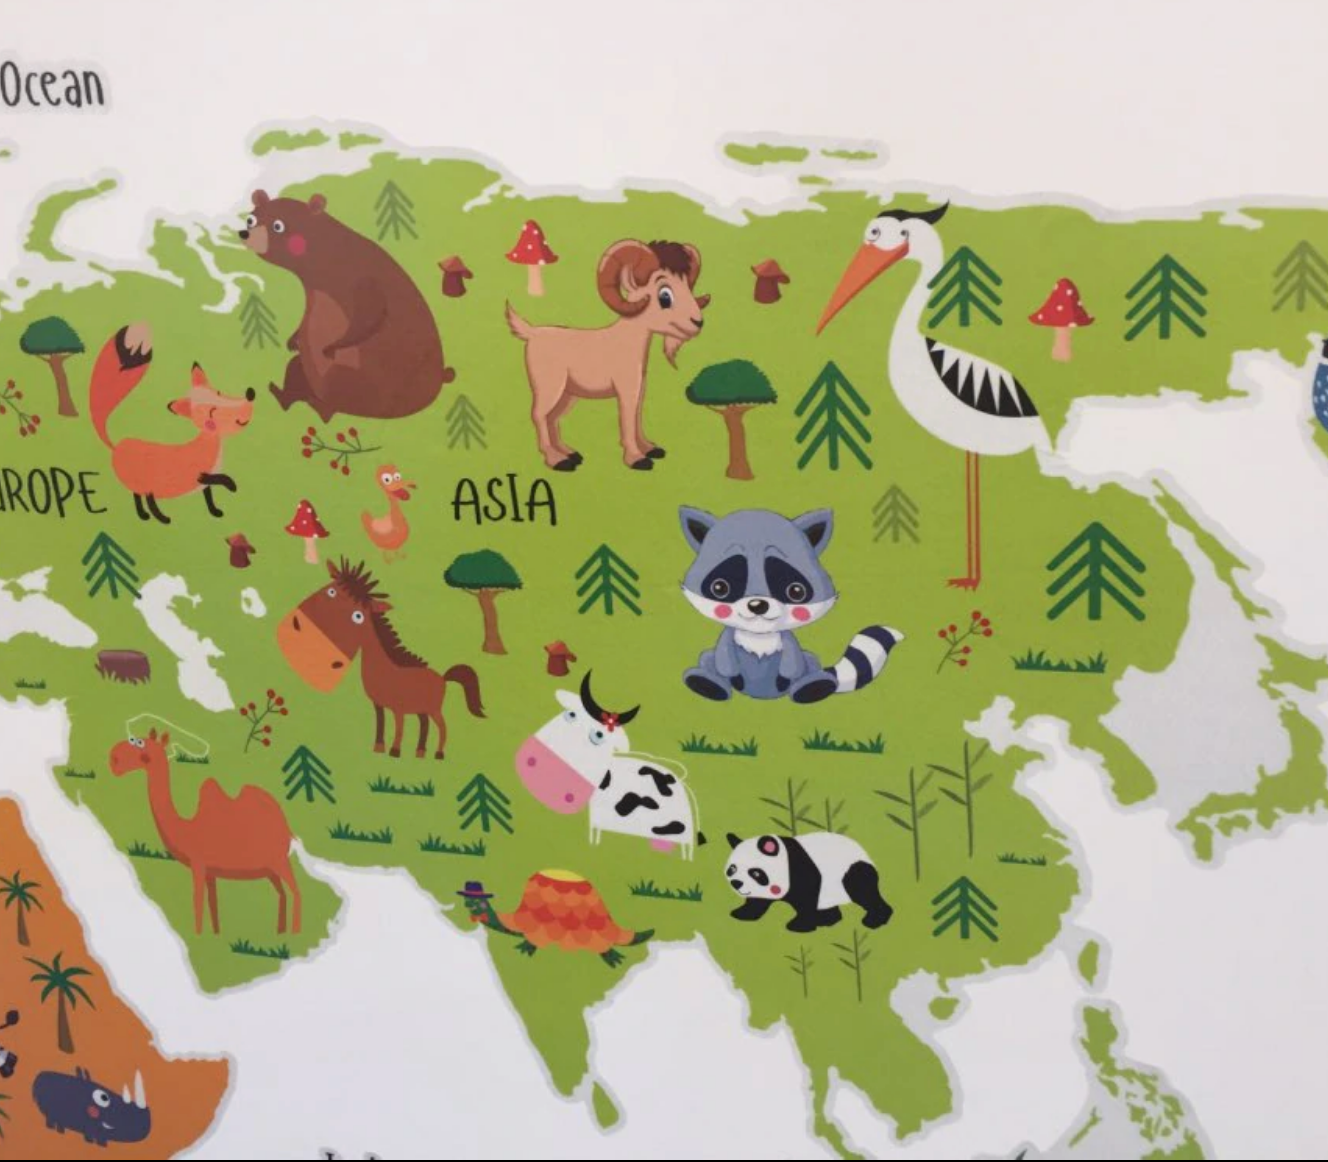 World Map With Animals Decal I Love The World Wall Sticker Just Kidding Store